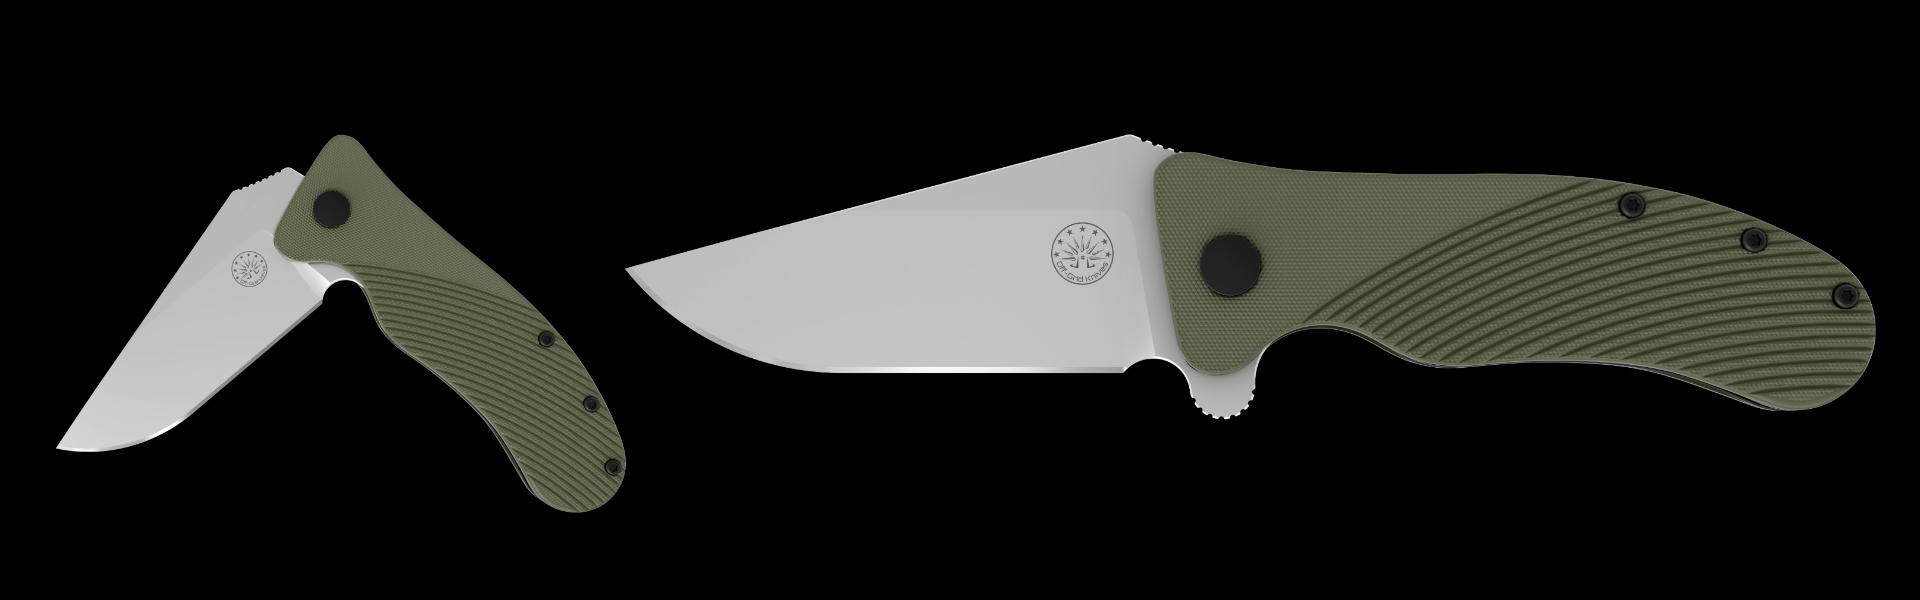 Top 5 Folding Knives Used By Our Armed Forces